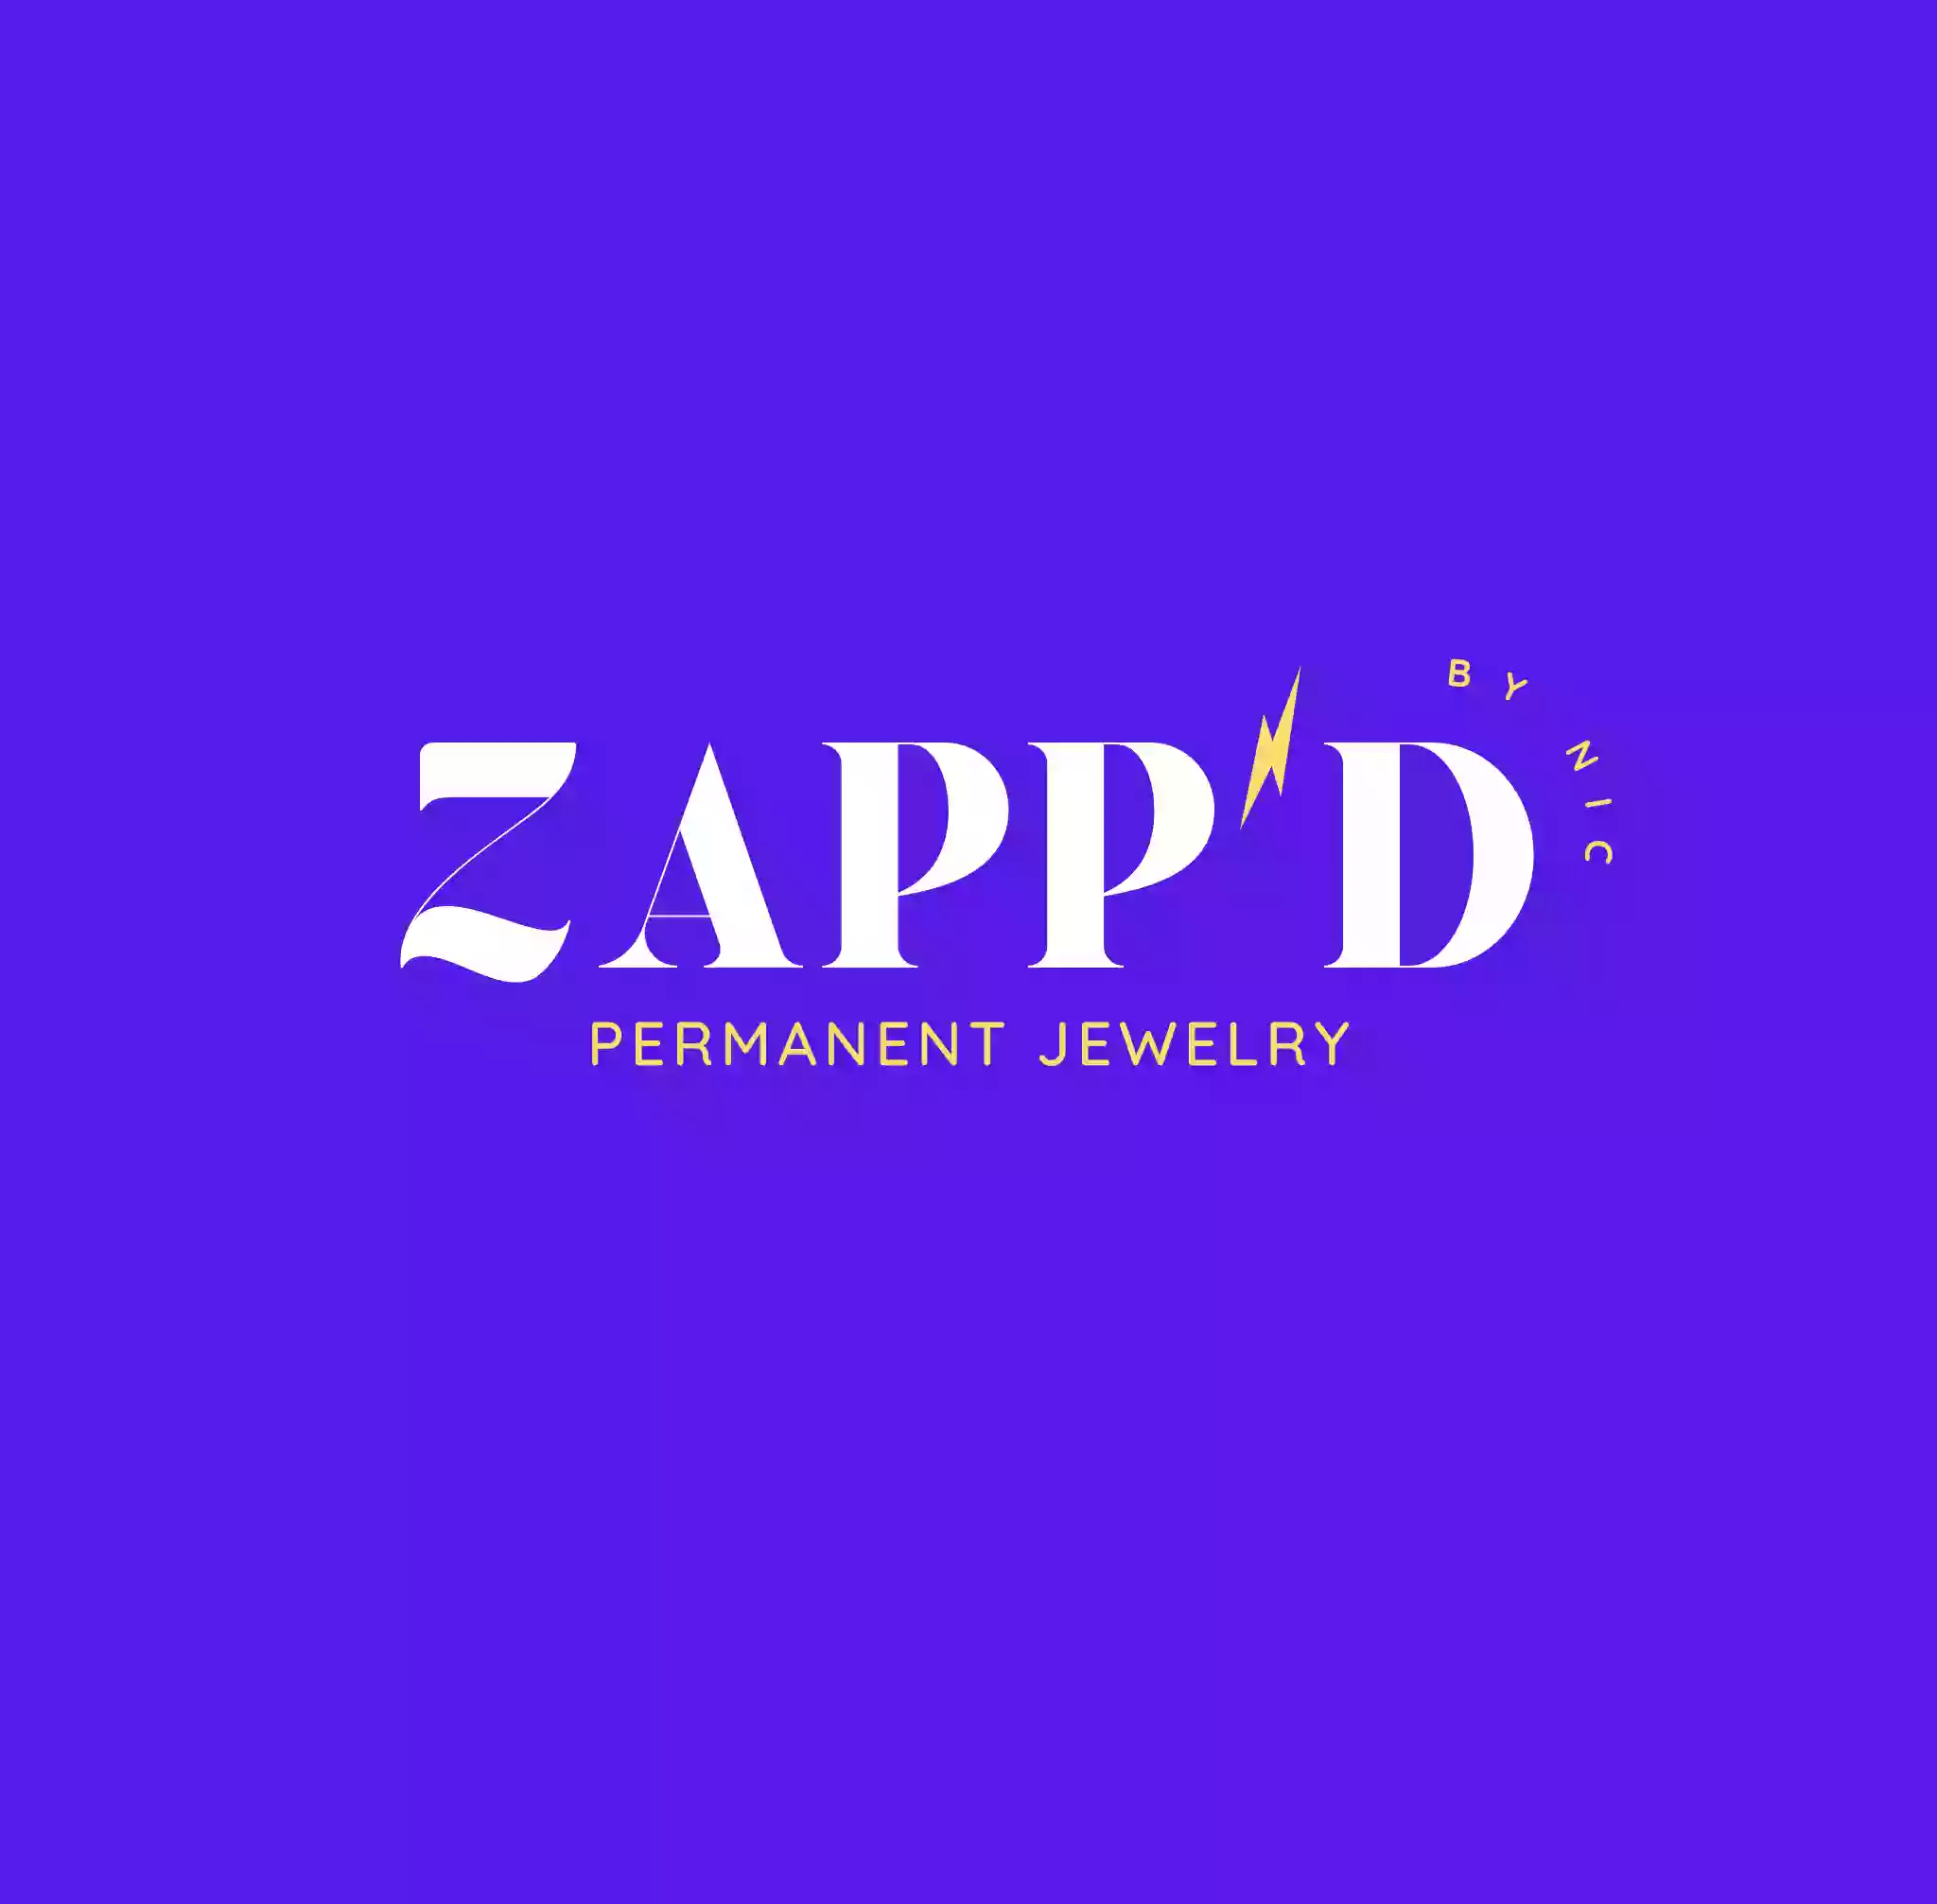 Zapp'd by Nic Permanent Jewelry